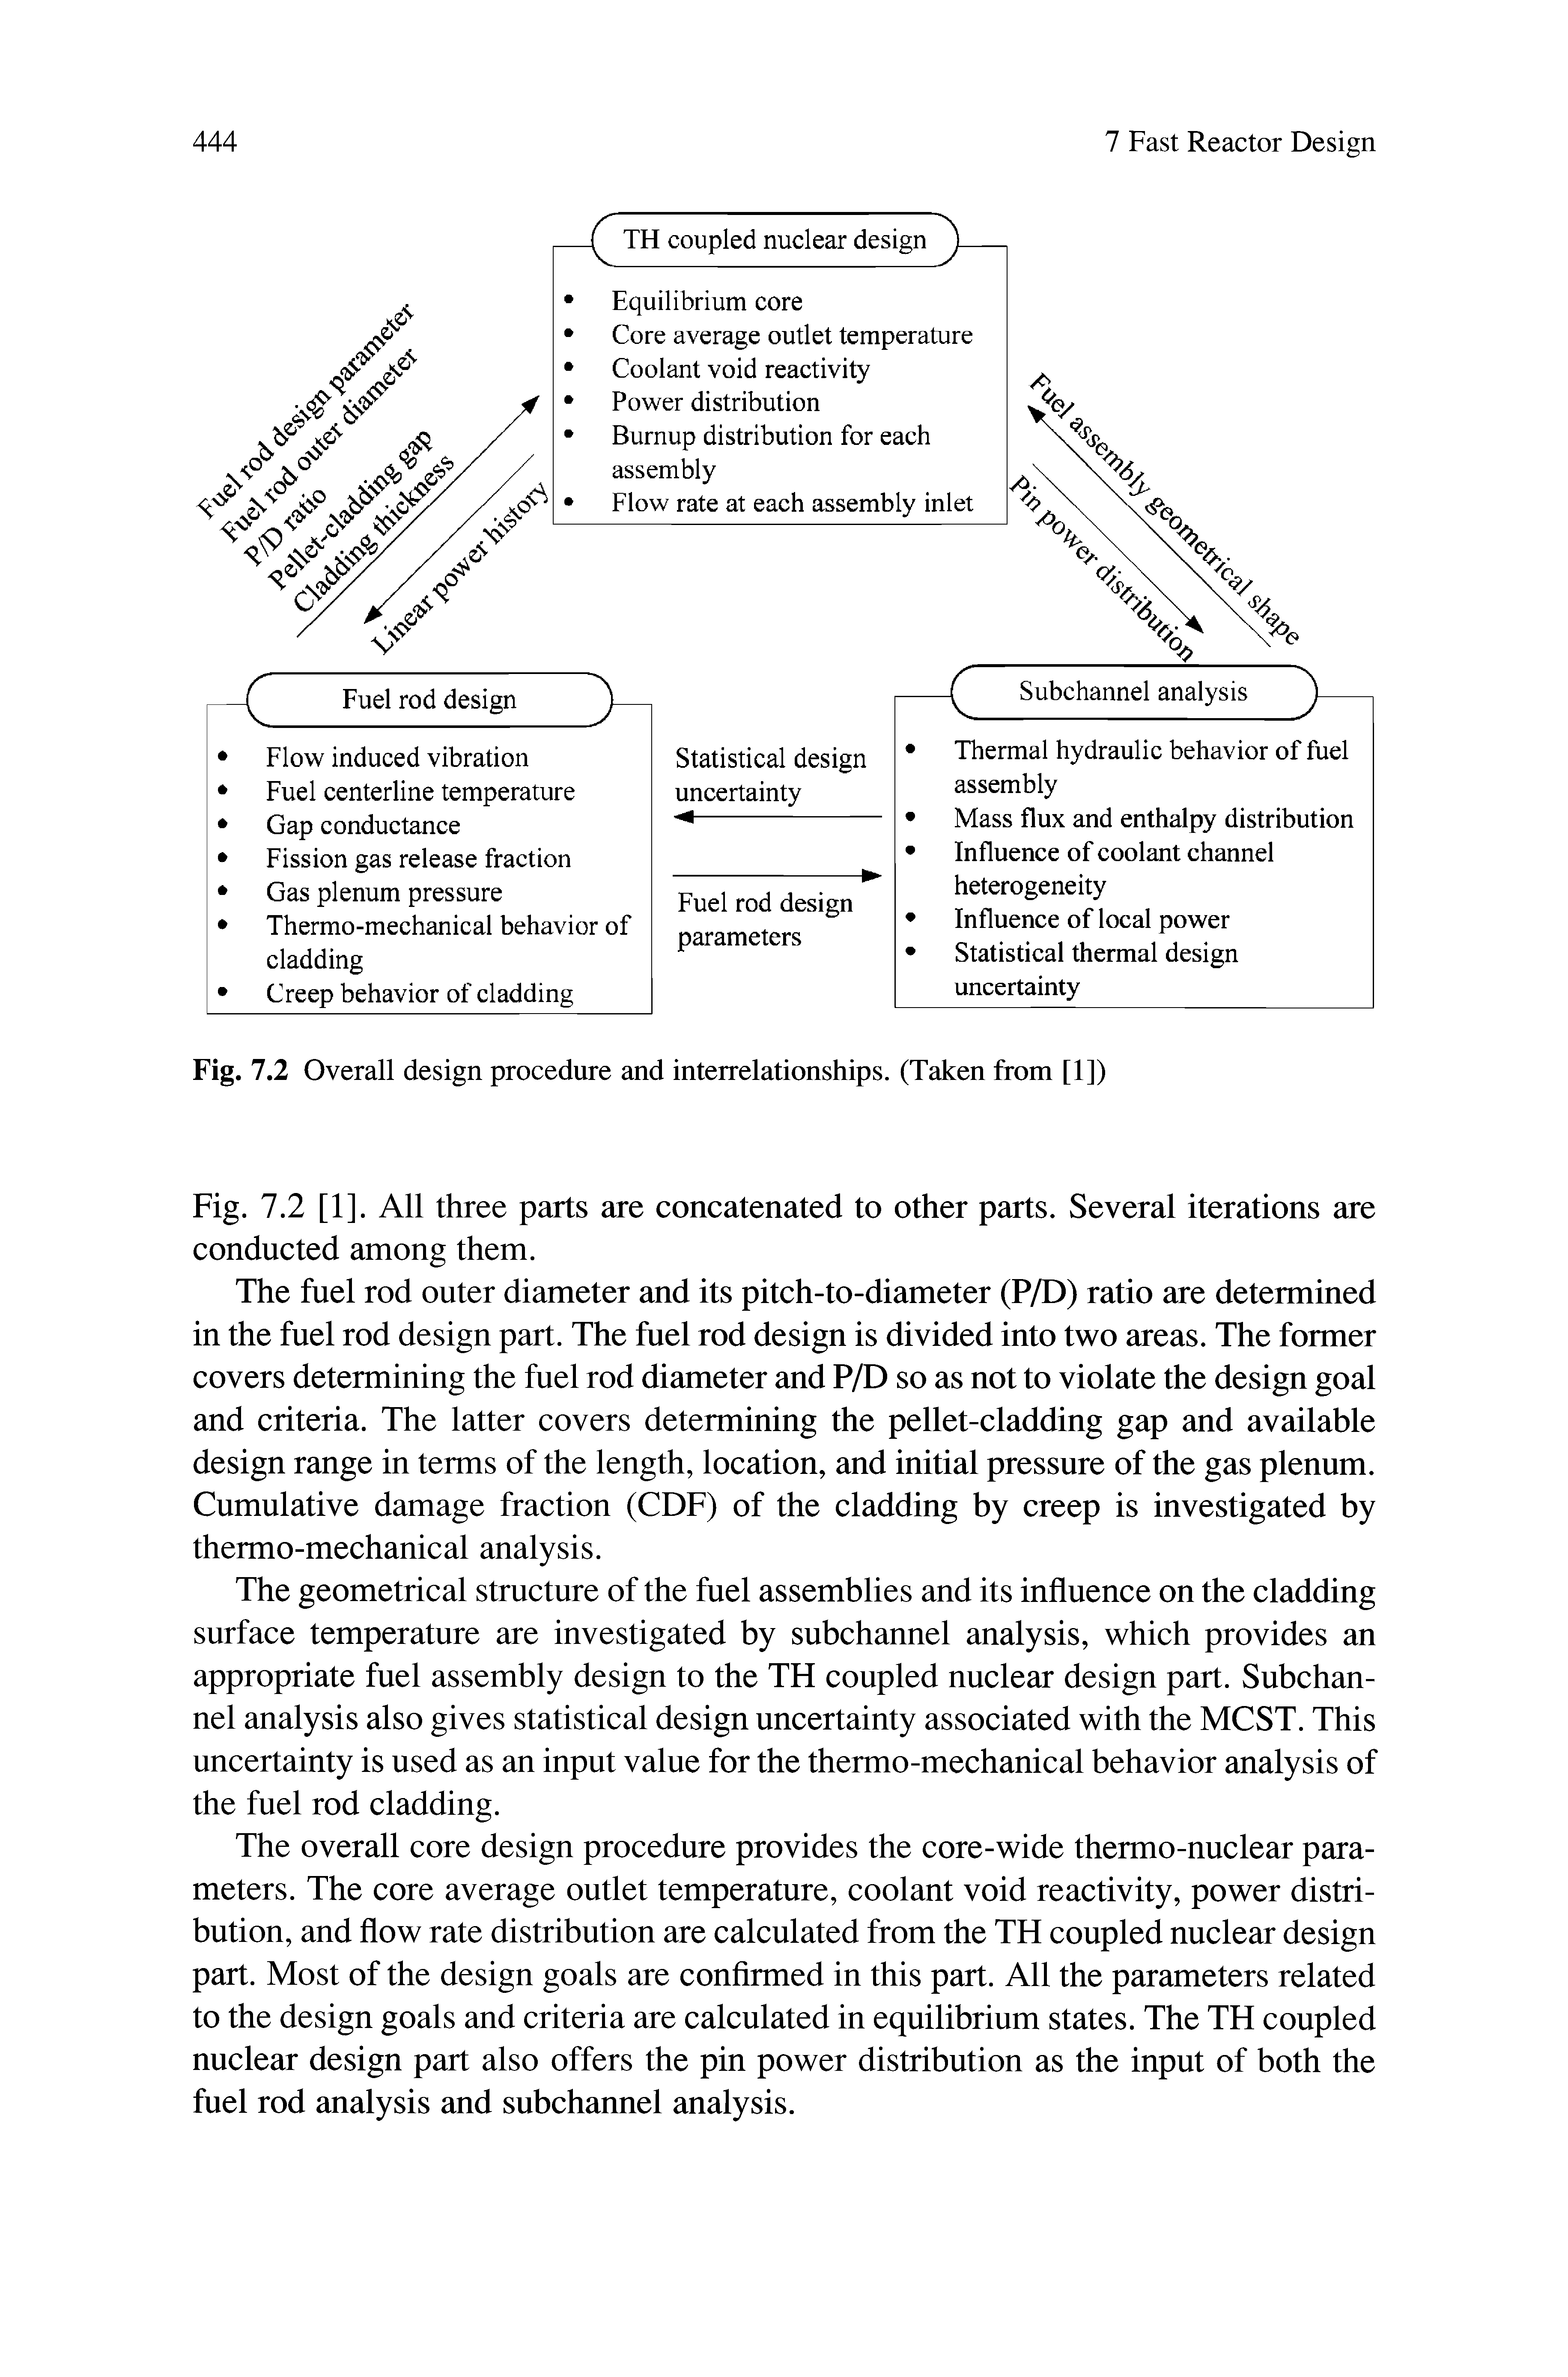 Fig. 7.2 Overall design procedure and interrelationships. (Taken from [1])...